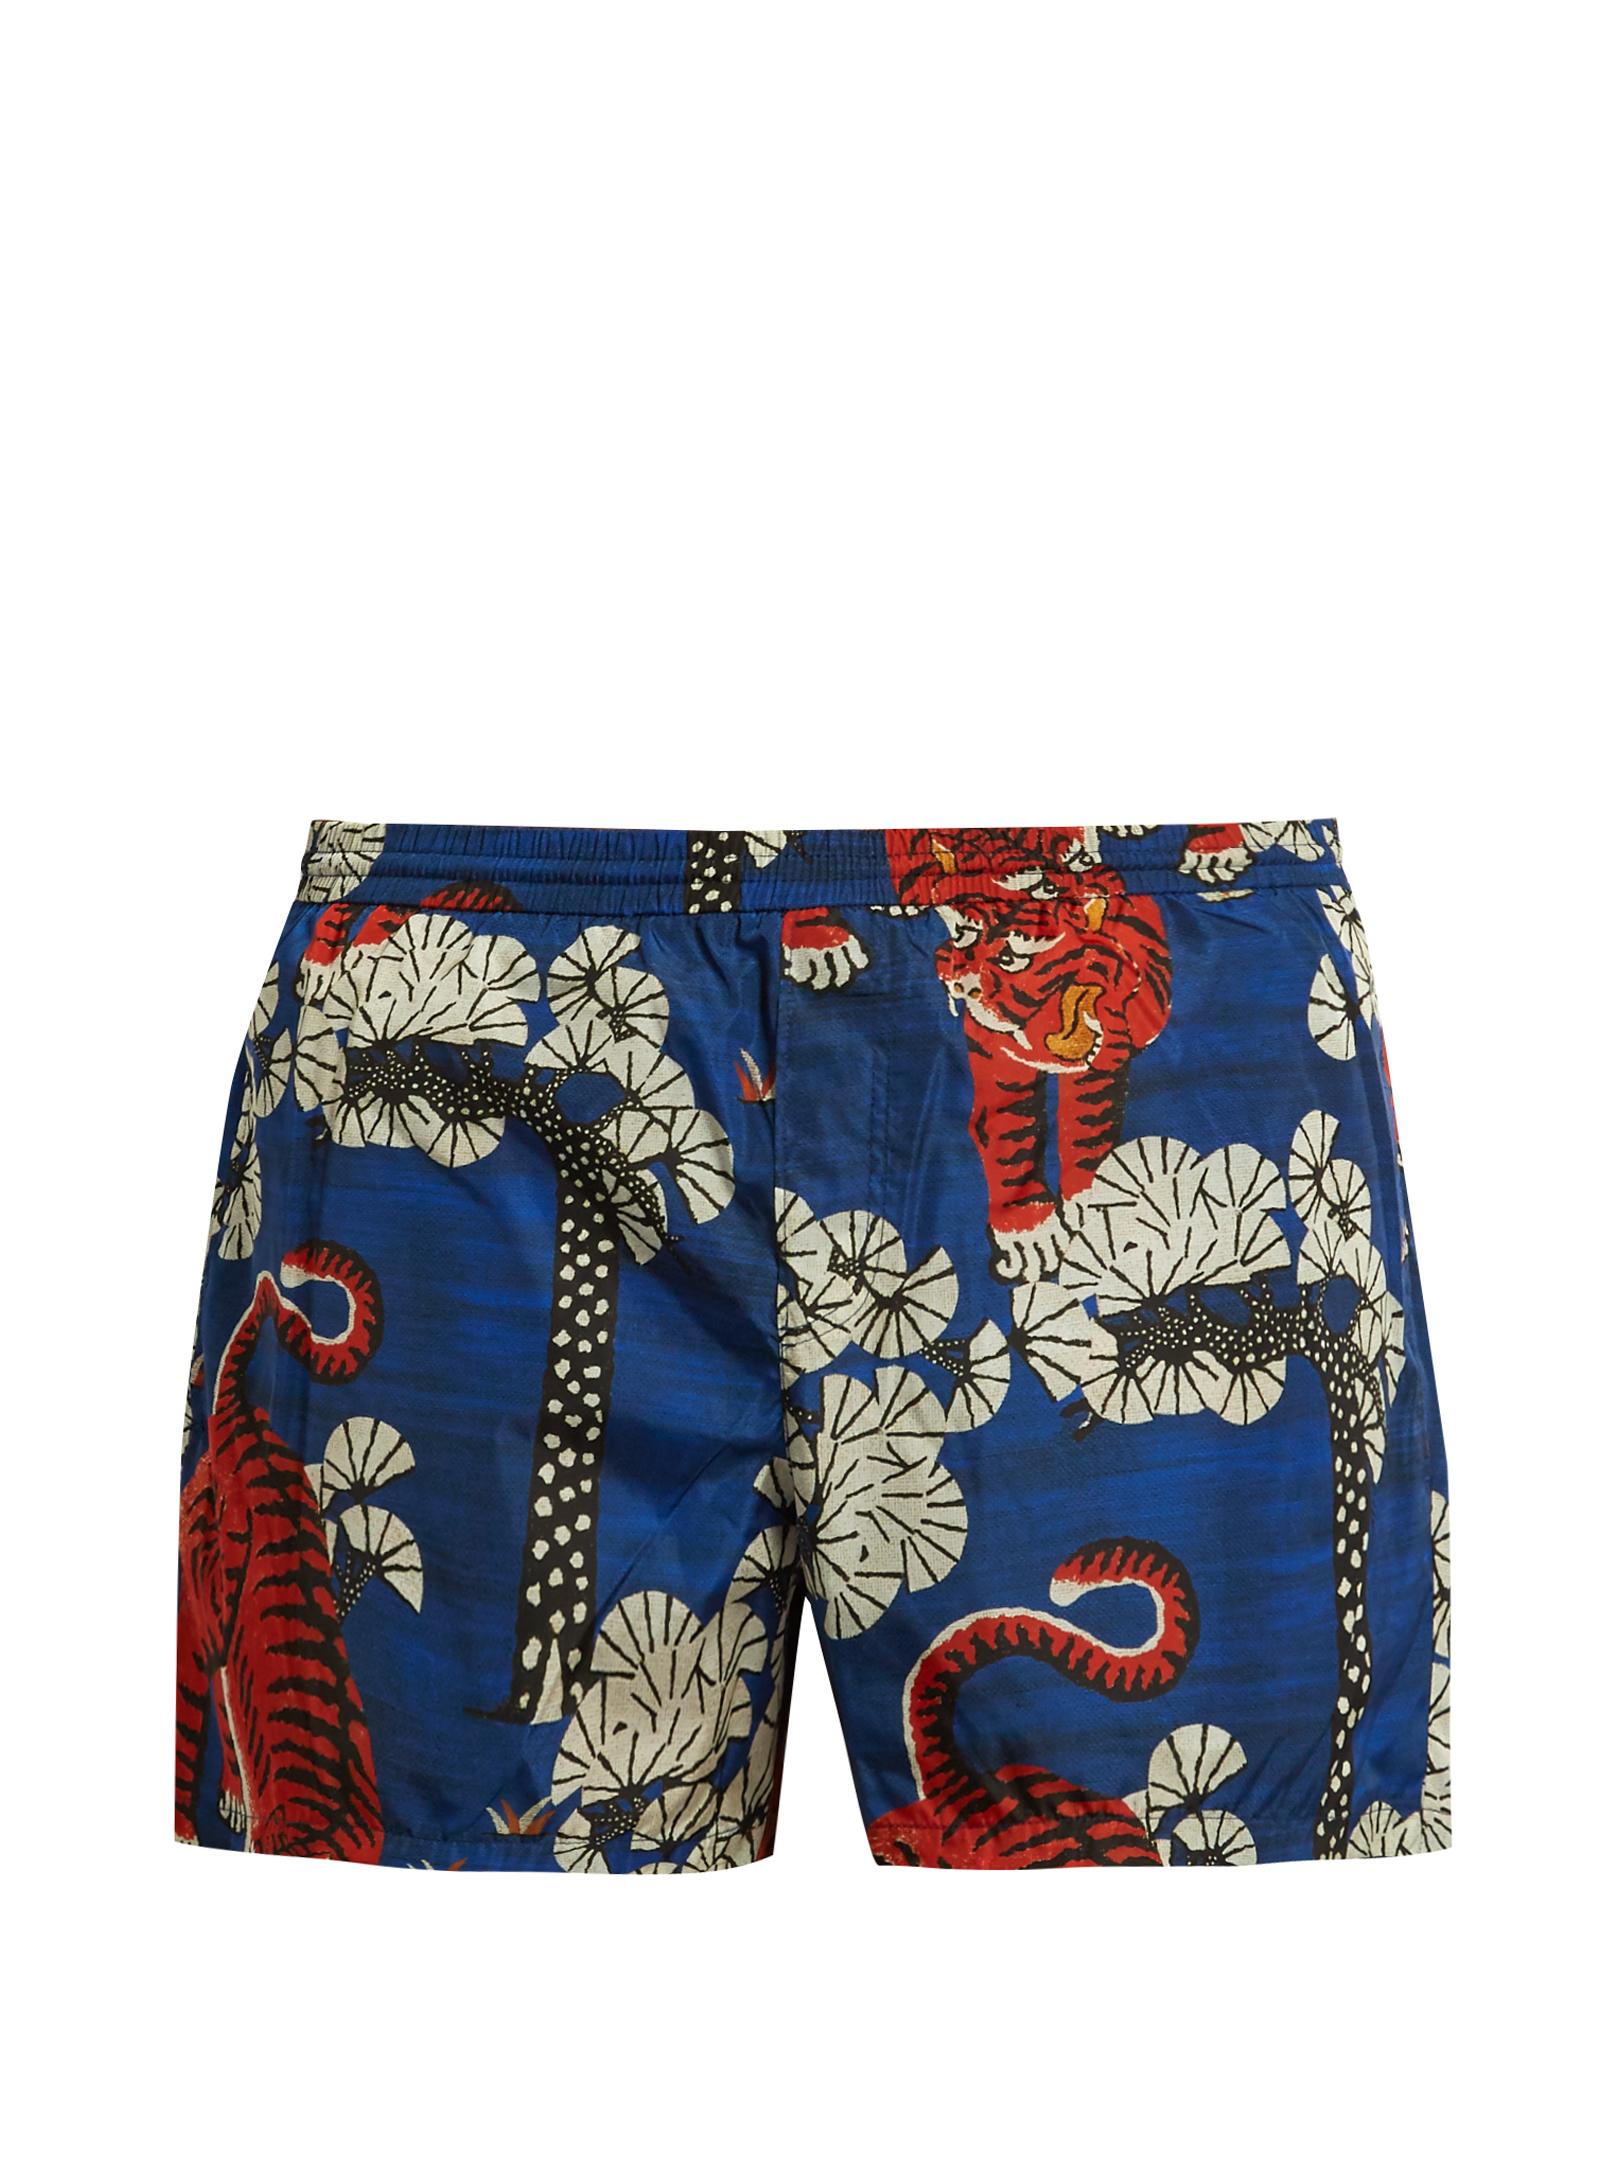 Gucci Bengal-print Swim Shorts in Blue for Men - Lyst